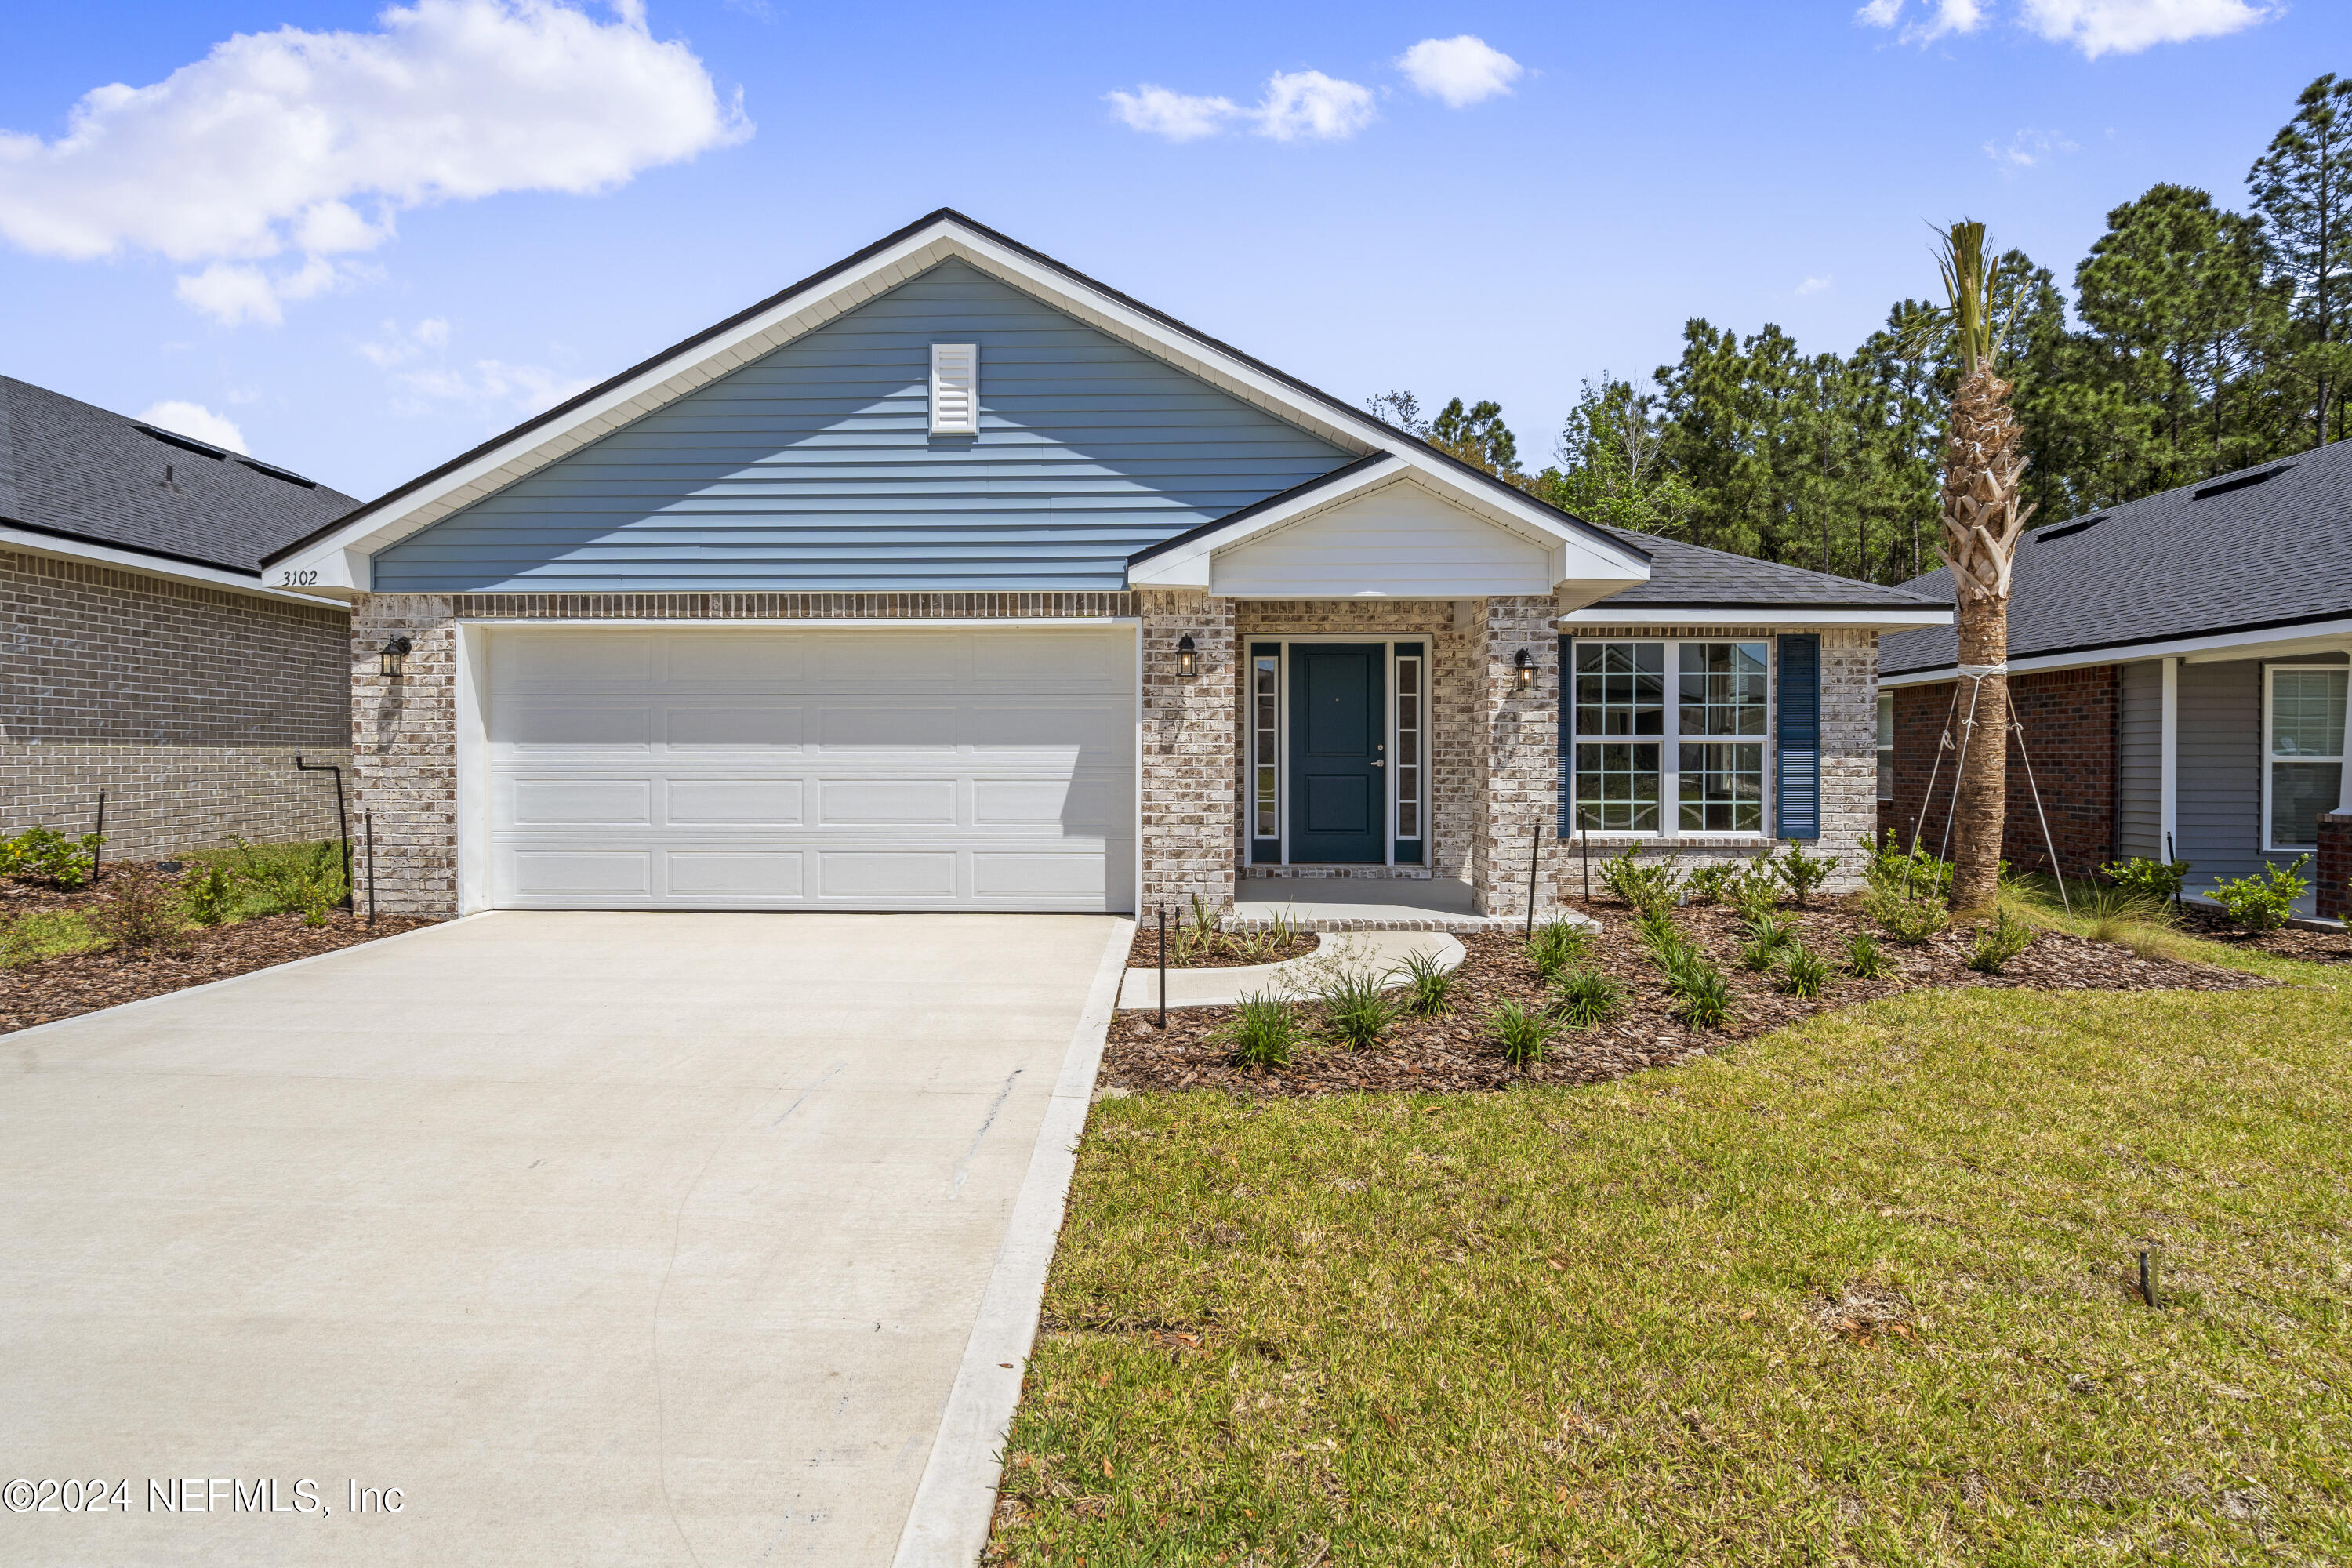 Green Cove Springs, FL home for sale located at 3102 Laurel Springs Drive, Green Cove Springs, FL 32043